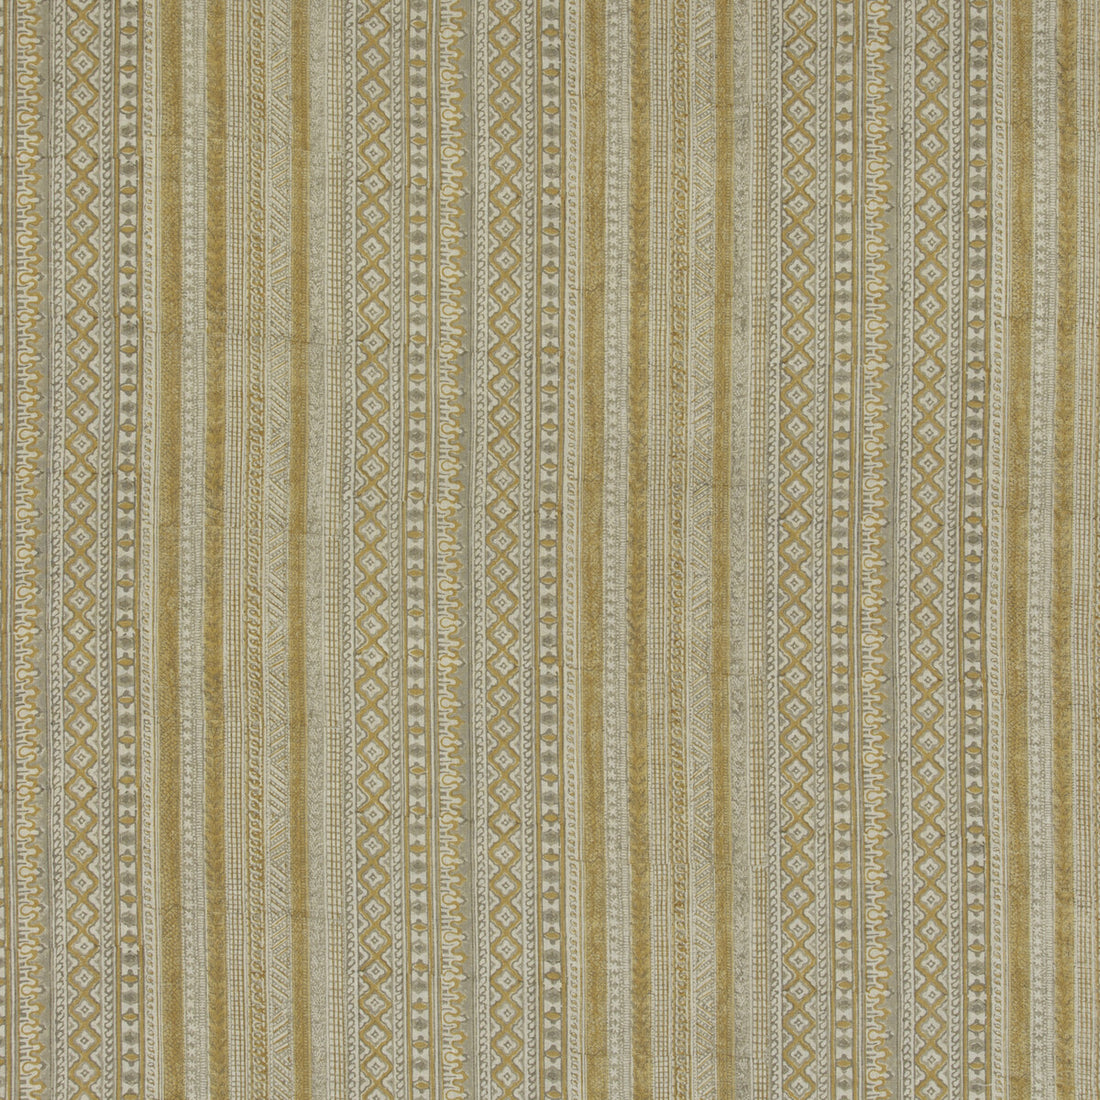 Kapisi fabric in ochre color - pattern BP10703.2.0 - by G P &amp; J Baker in the East To West collection